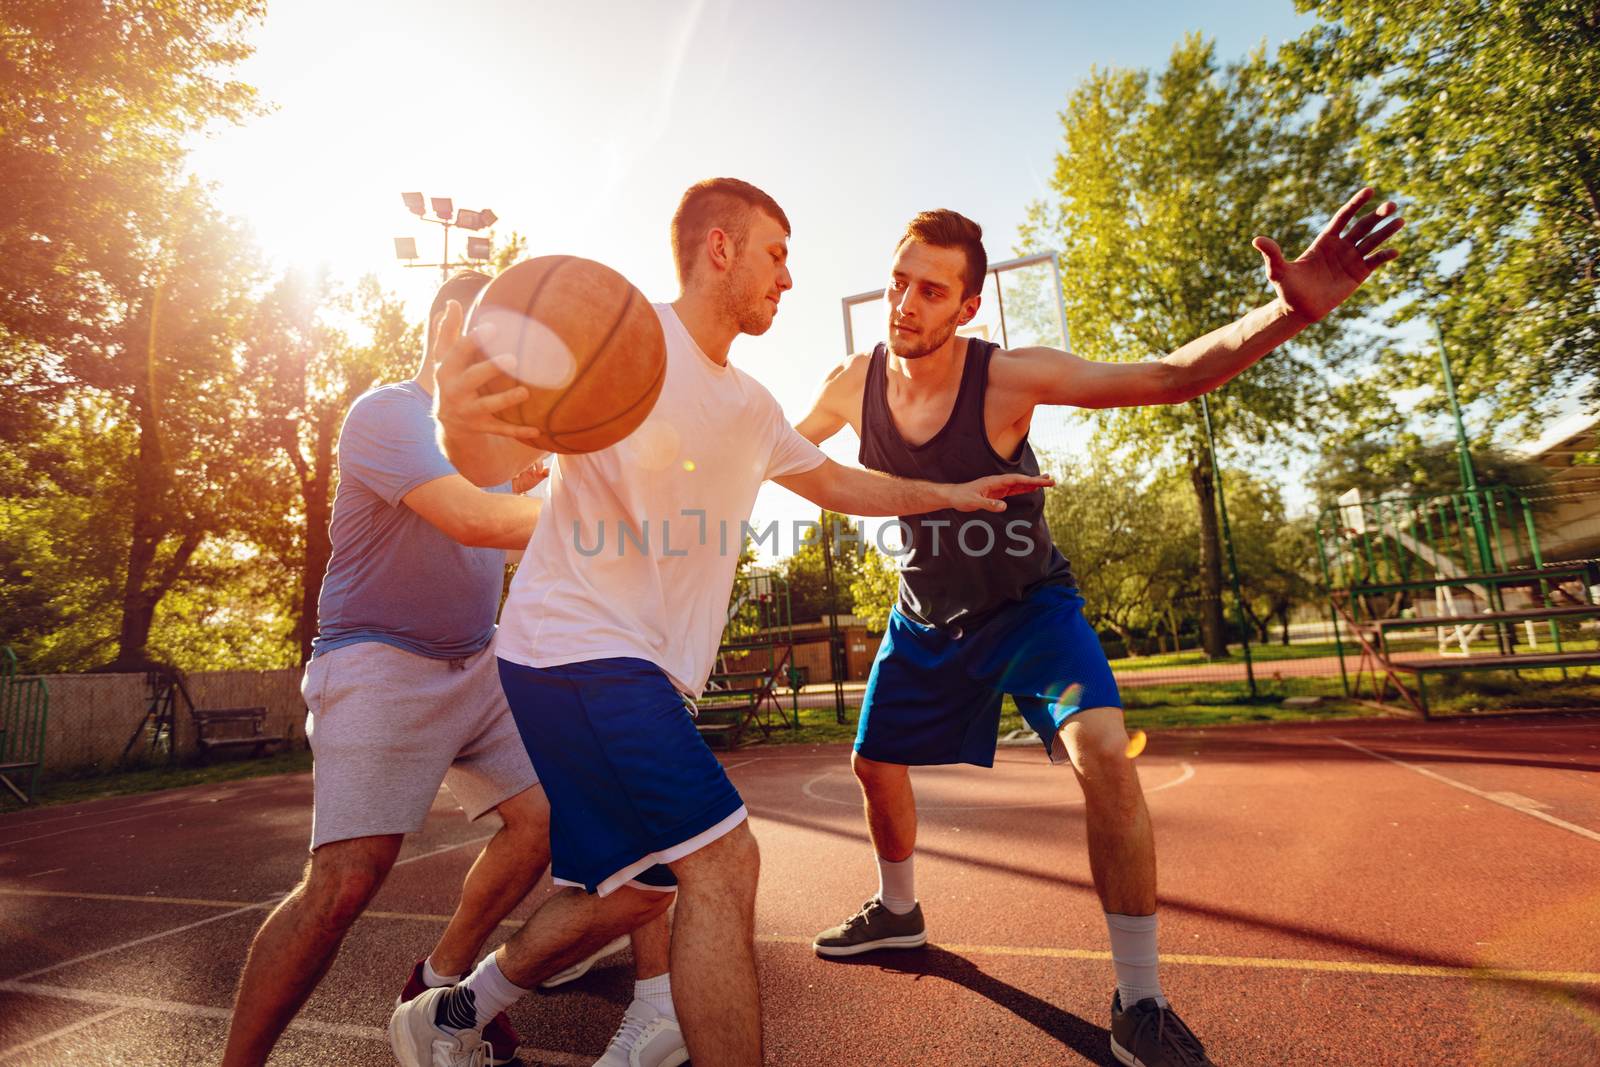 Young basketball players have a training outdoor. They are playing and making action together.